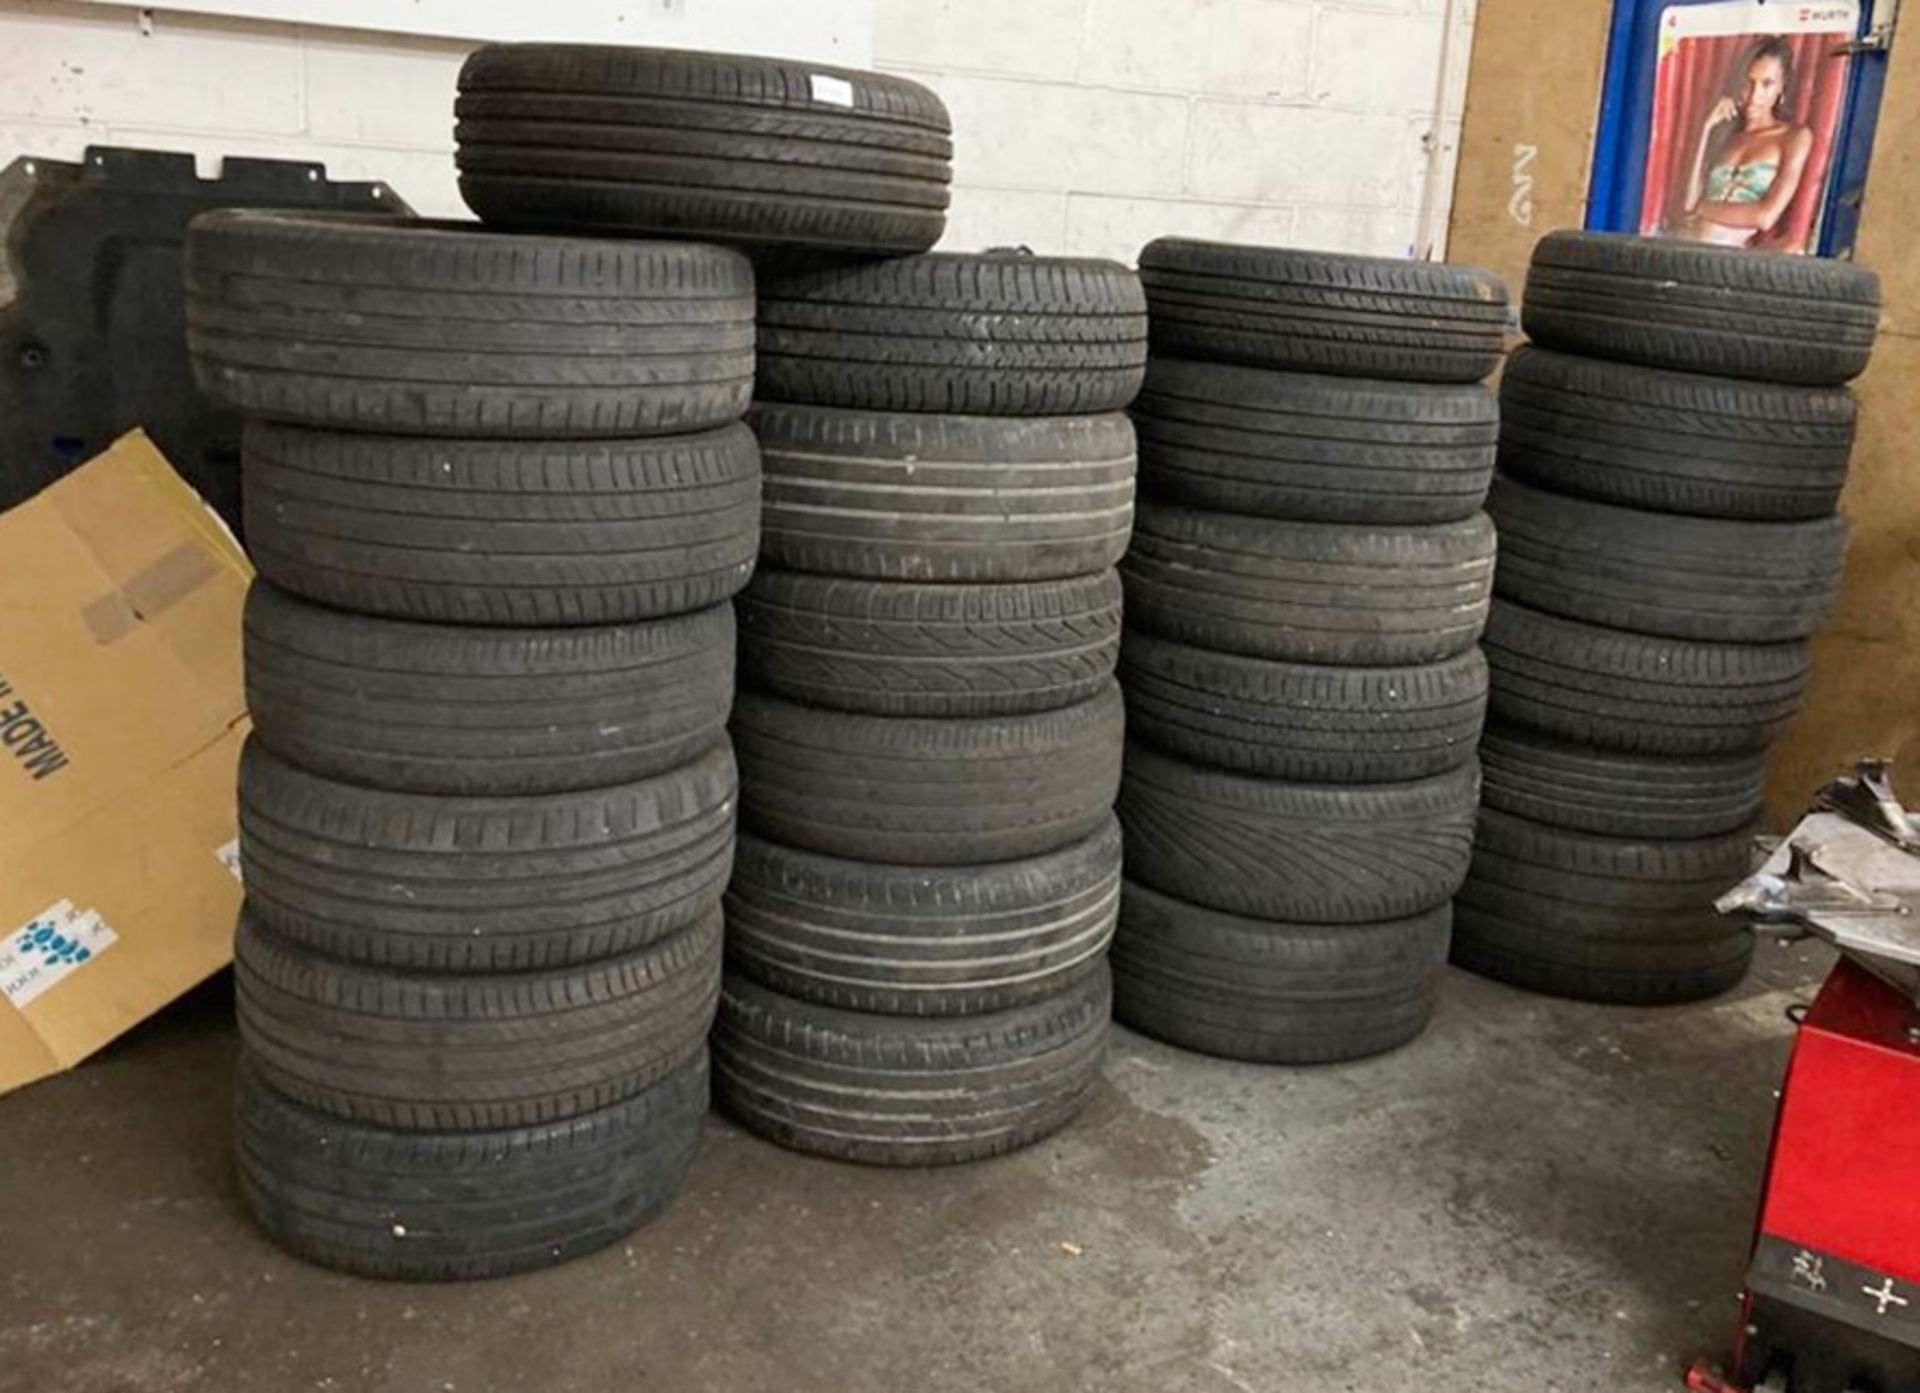 29 x Part Worn Motor Vehicle Car Tyres and 4 x Wheels - Various Sizes and Conditions - Ref: - Image 3 of 4